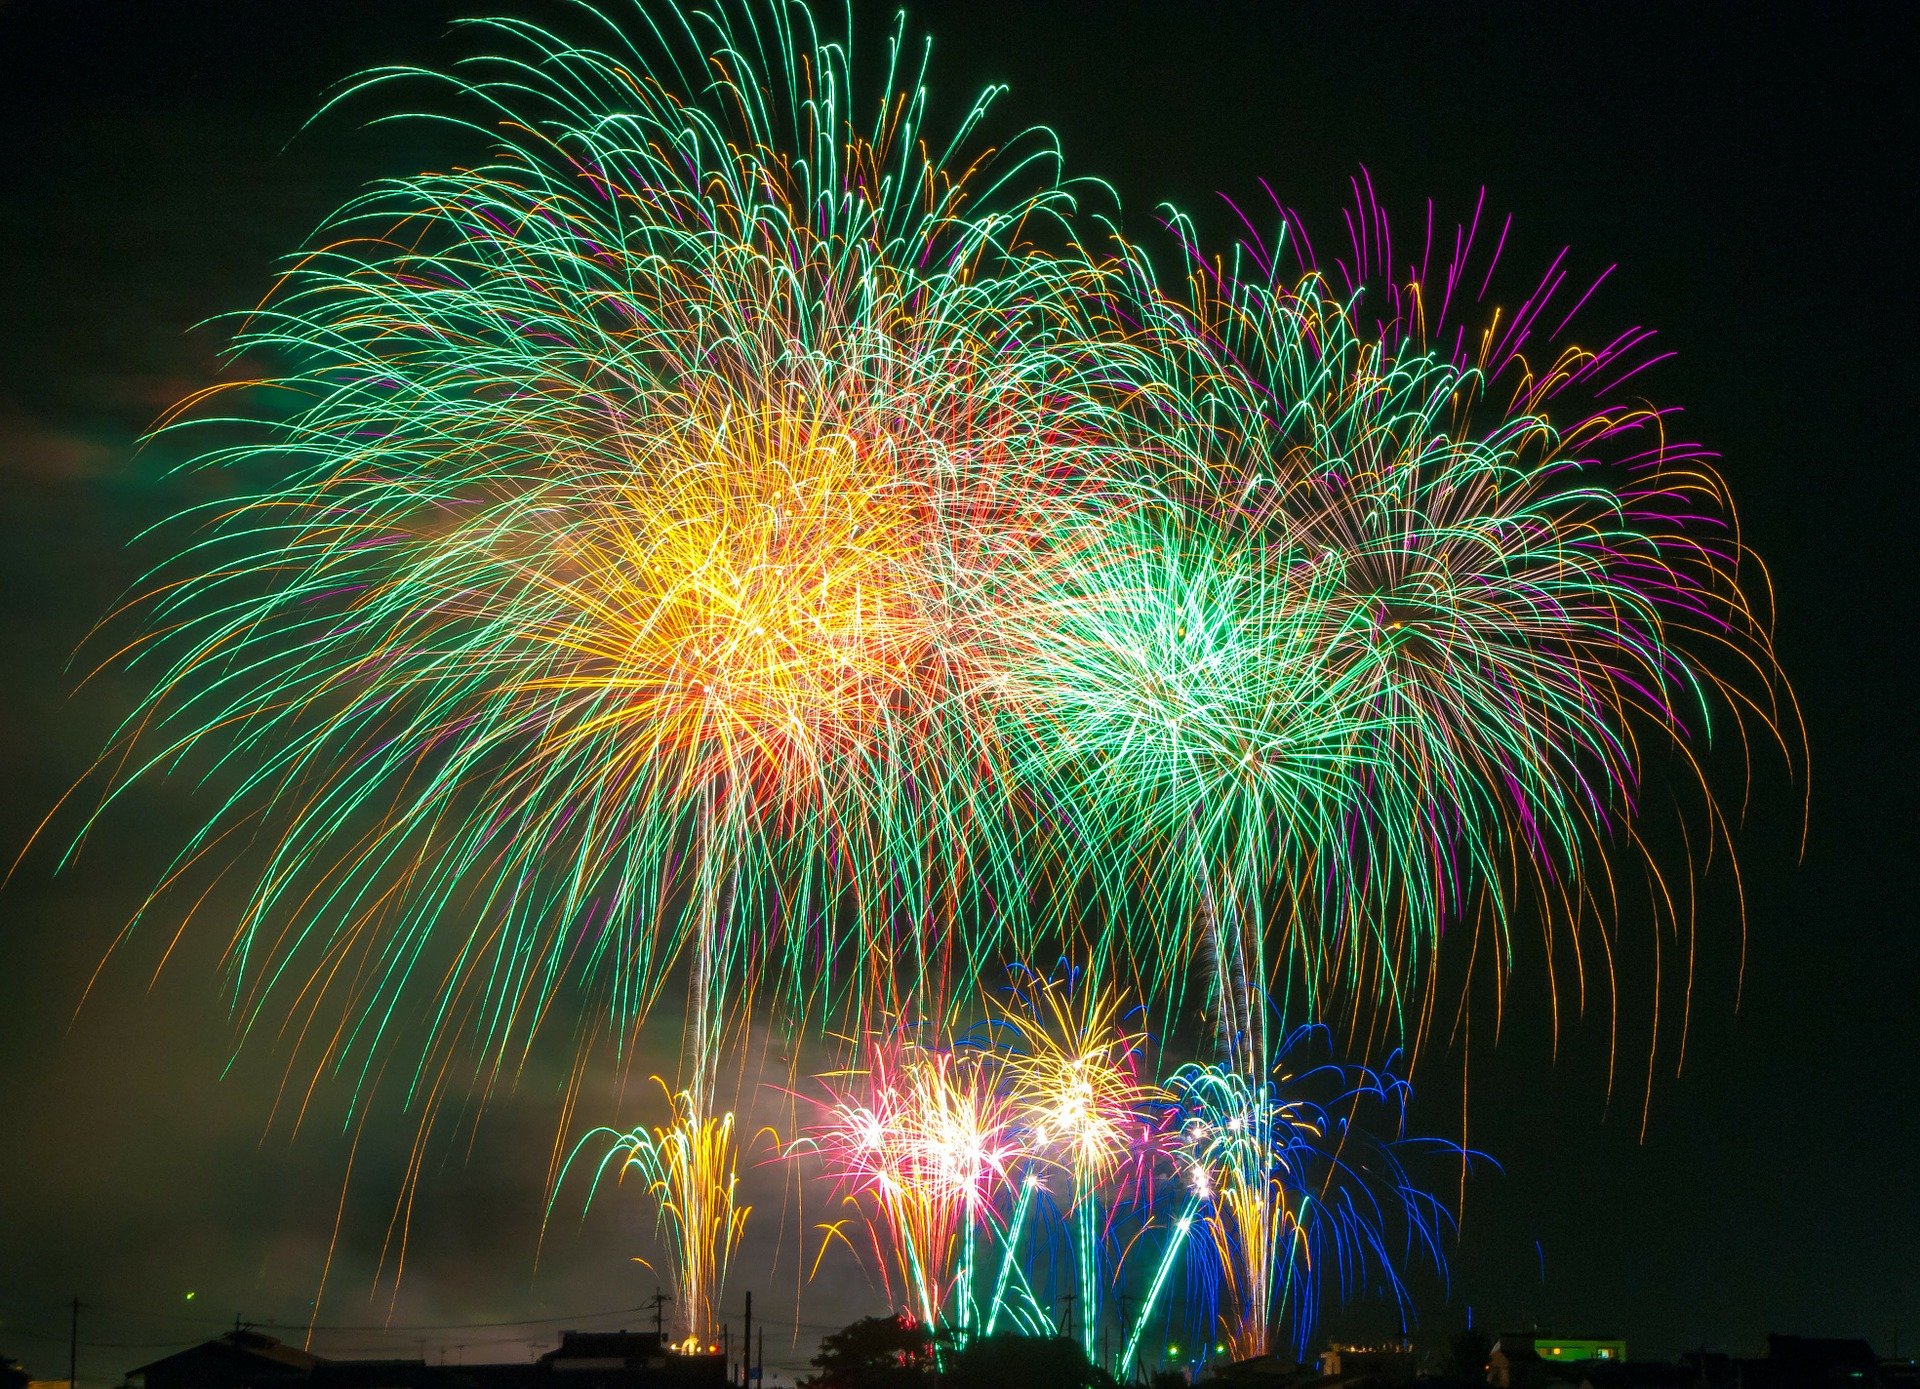 Enjoy fireworks and more this New Year's in North Lake Tahoe